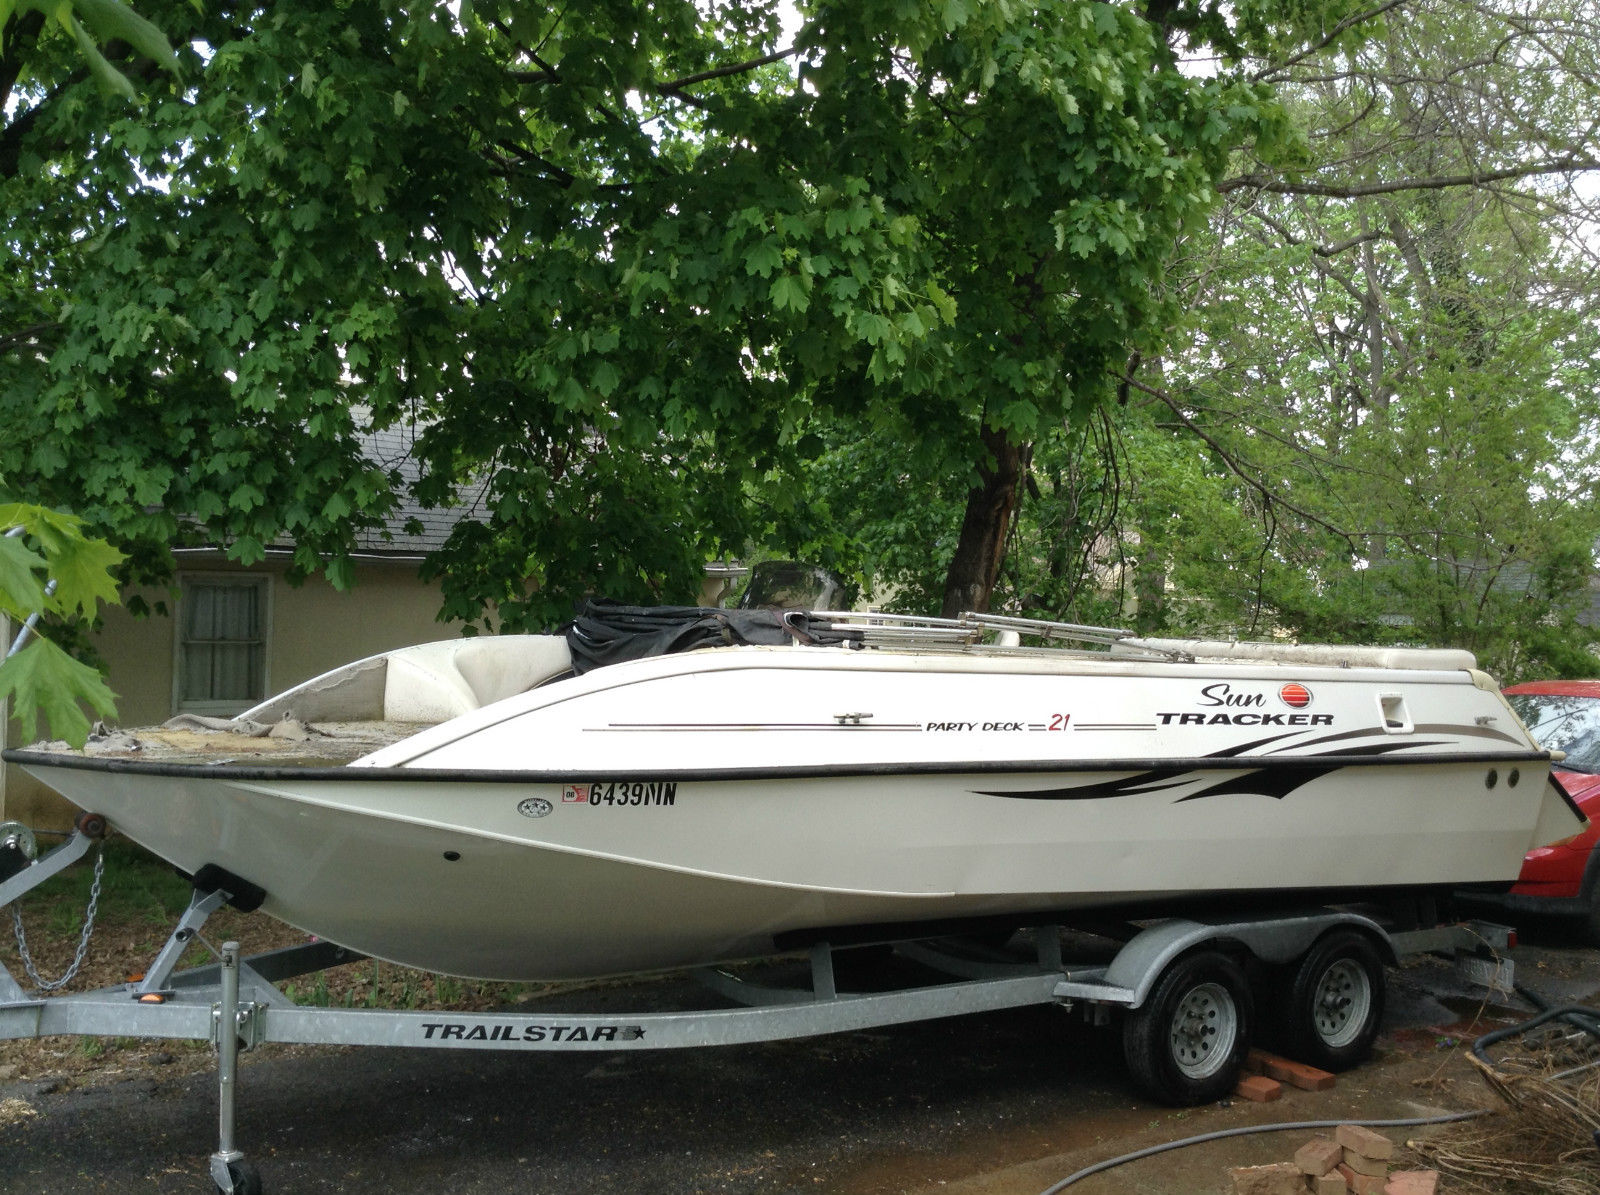 21' party deck project boat 2004 for sale for $5,500